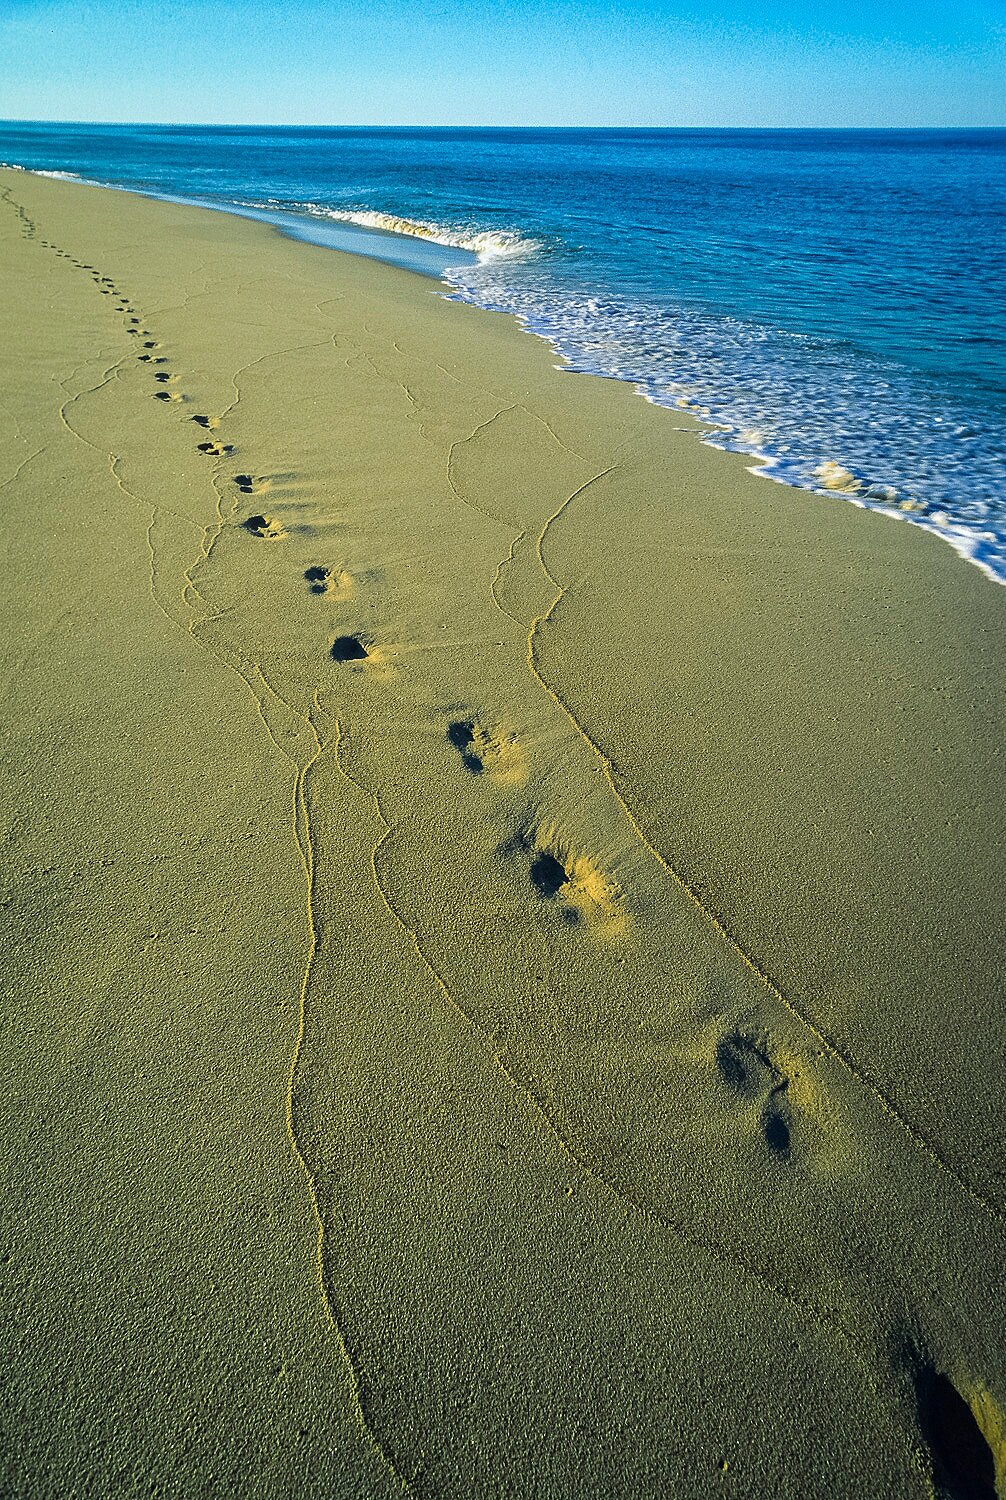 Leave Only Footprints 